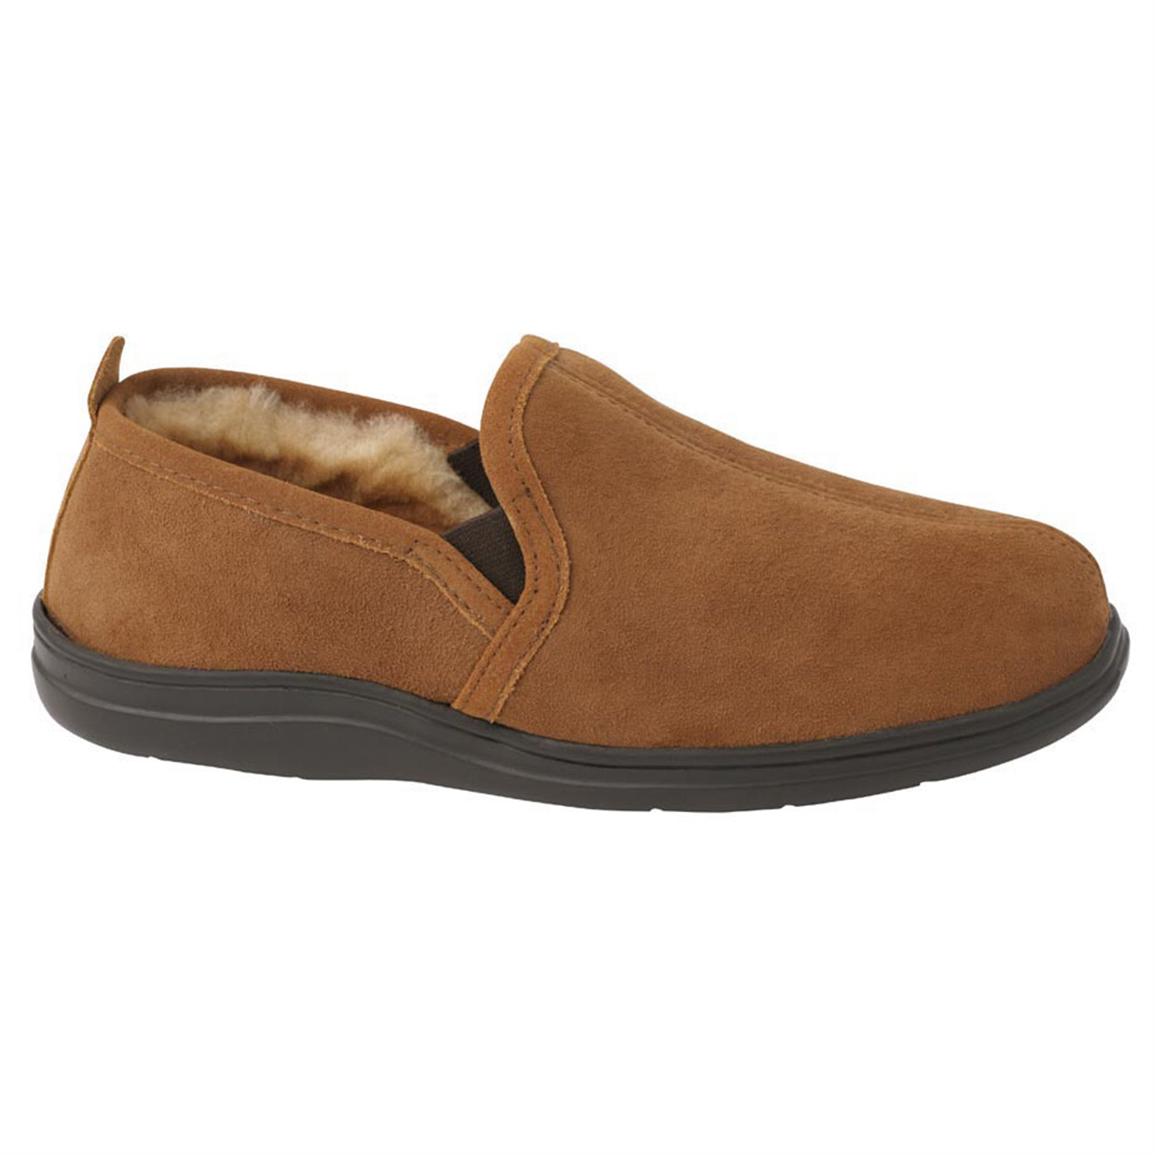 Men's L.B. Evans® Outback™ Slippers - 128015, Slippers at Sportsman's Guide